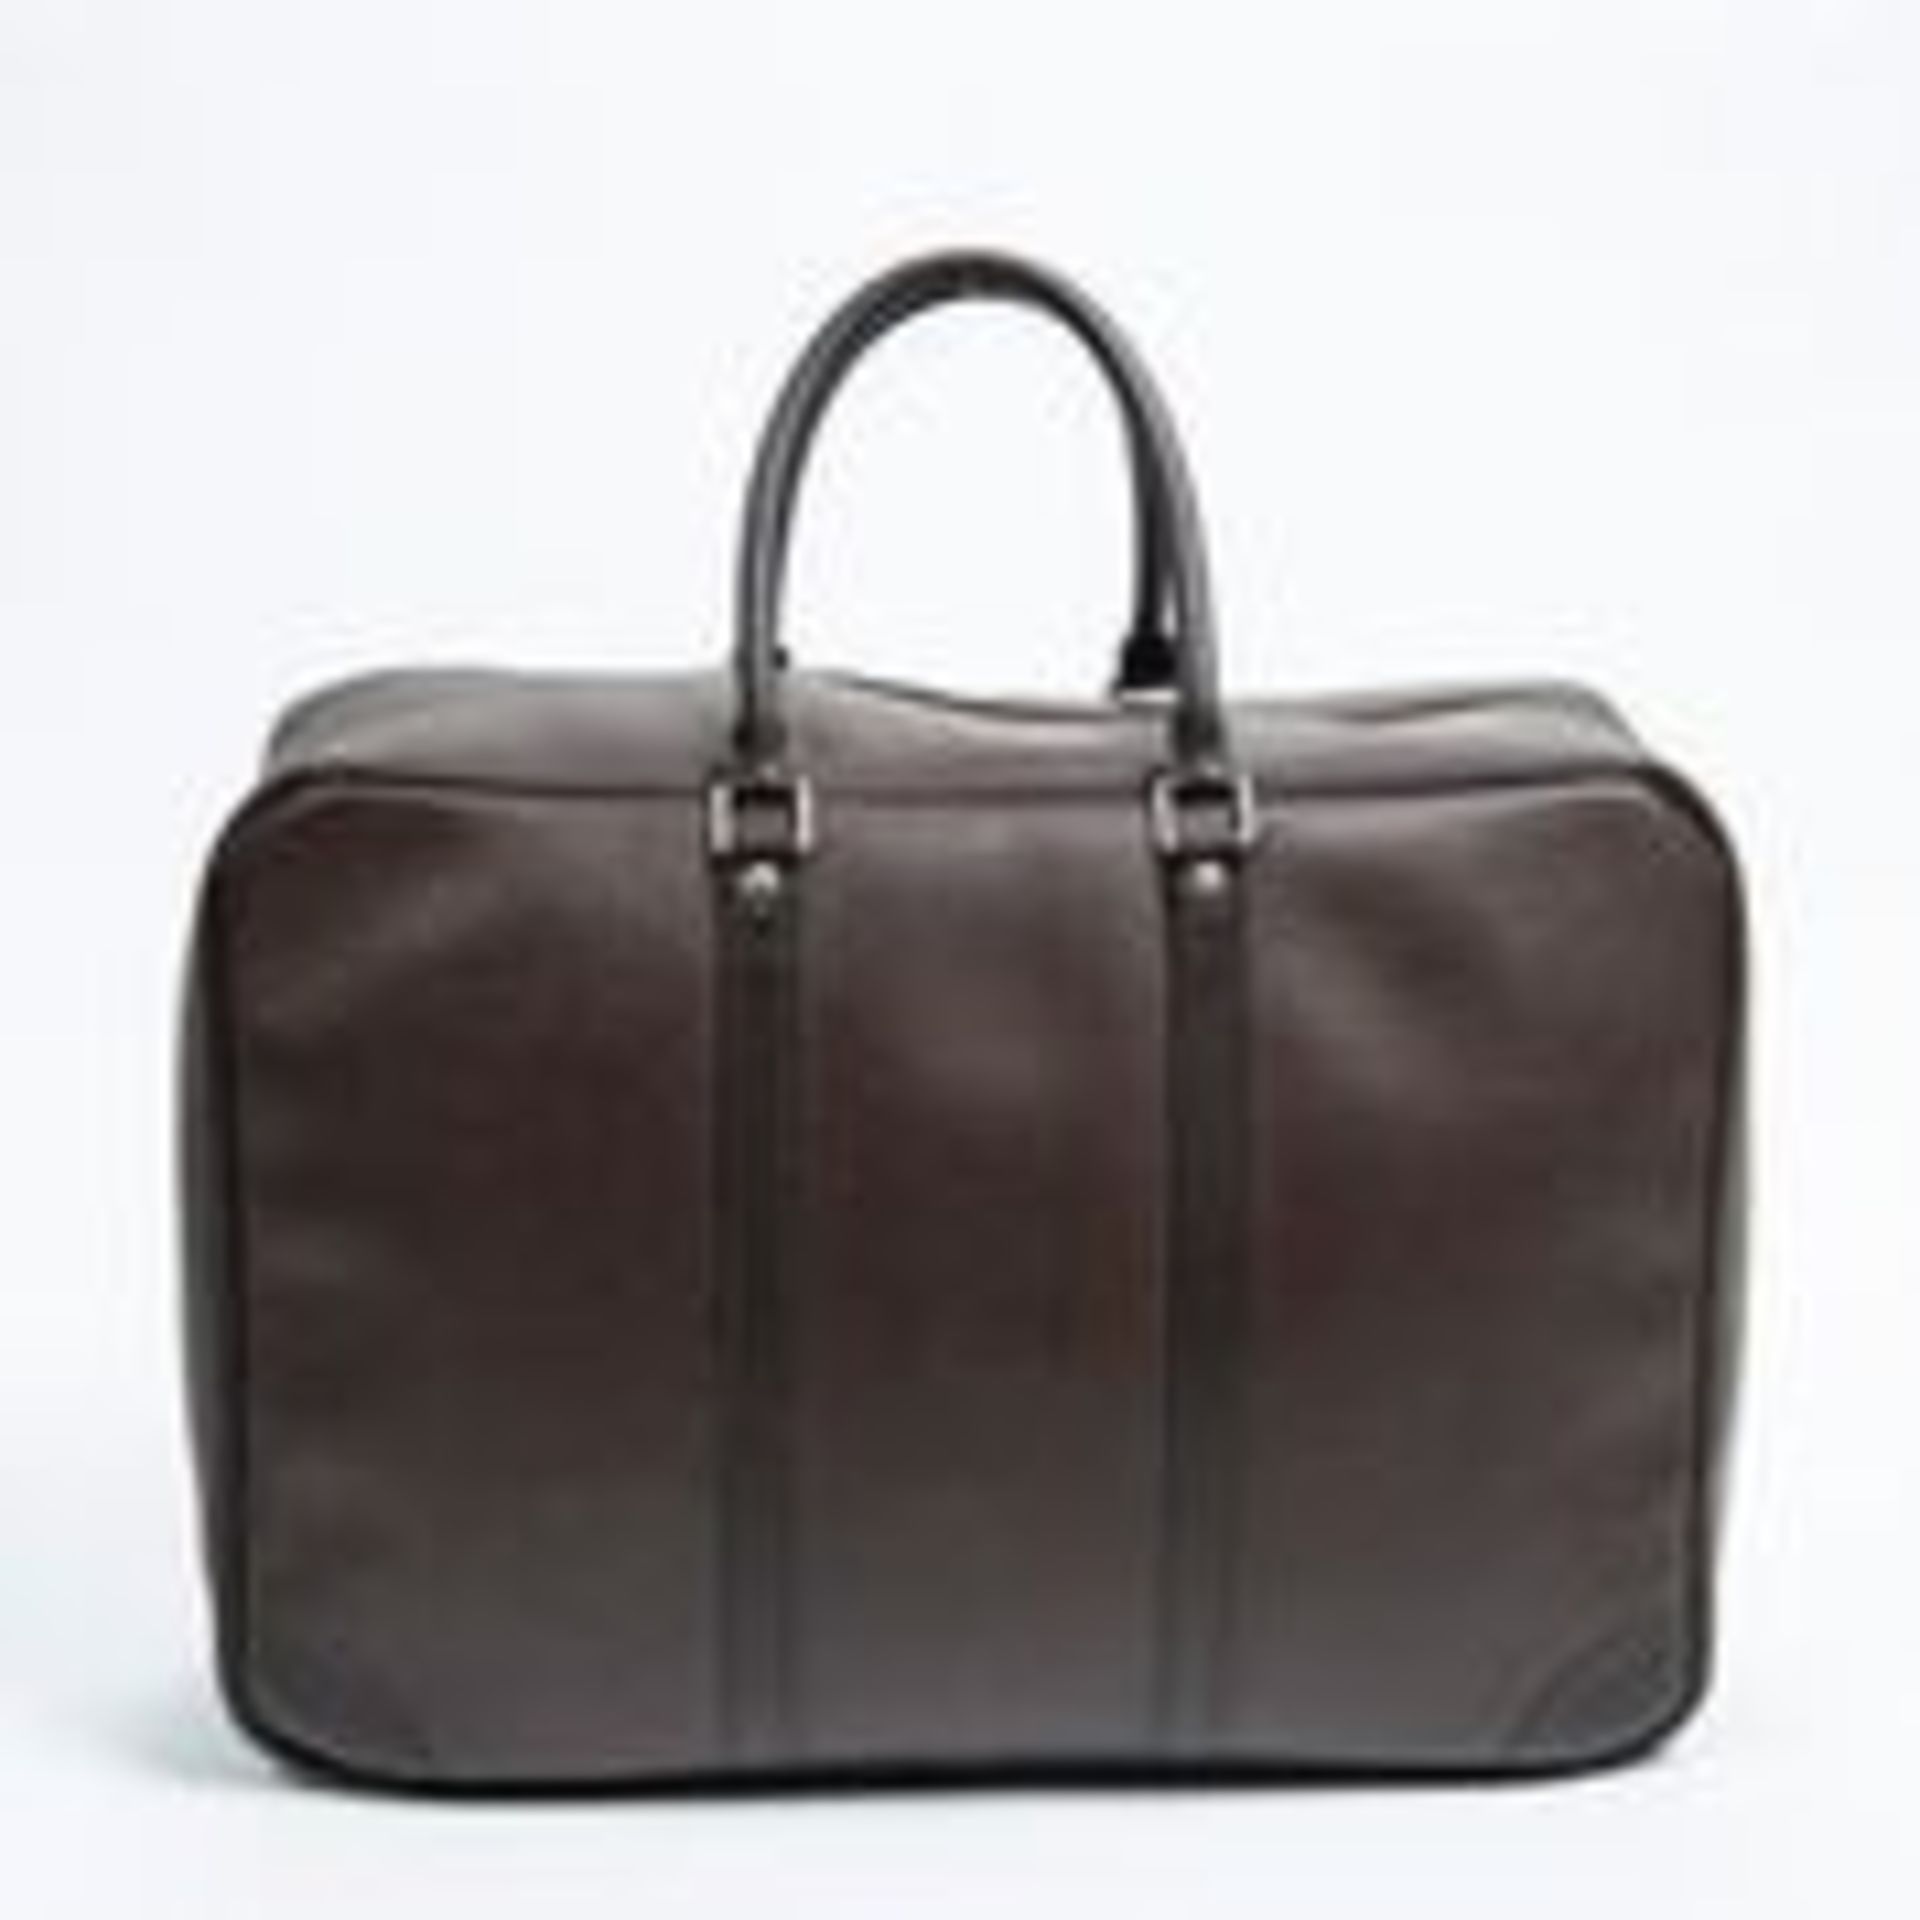 RRP £1,850 Louis Vuitton Sirius Travel Bag Brown - AAR5019 - Grade AB - Please Contact Us Directly - Image 2 of 4